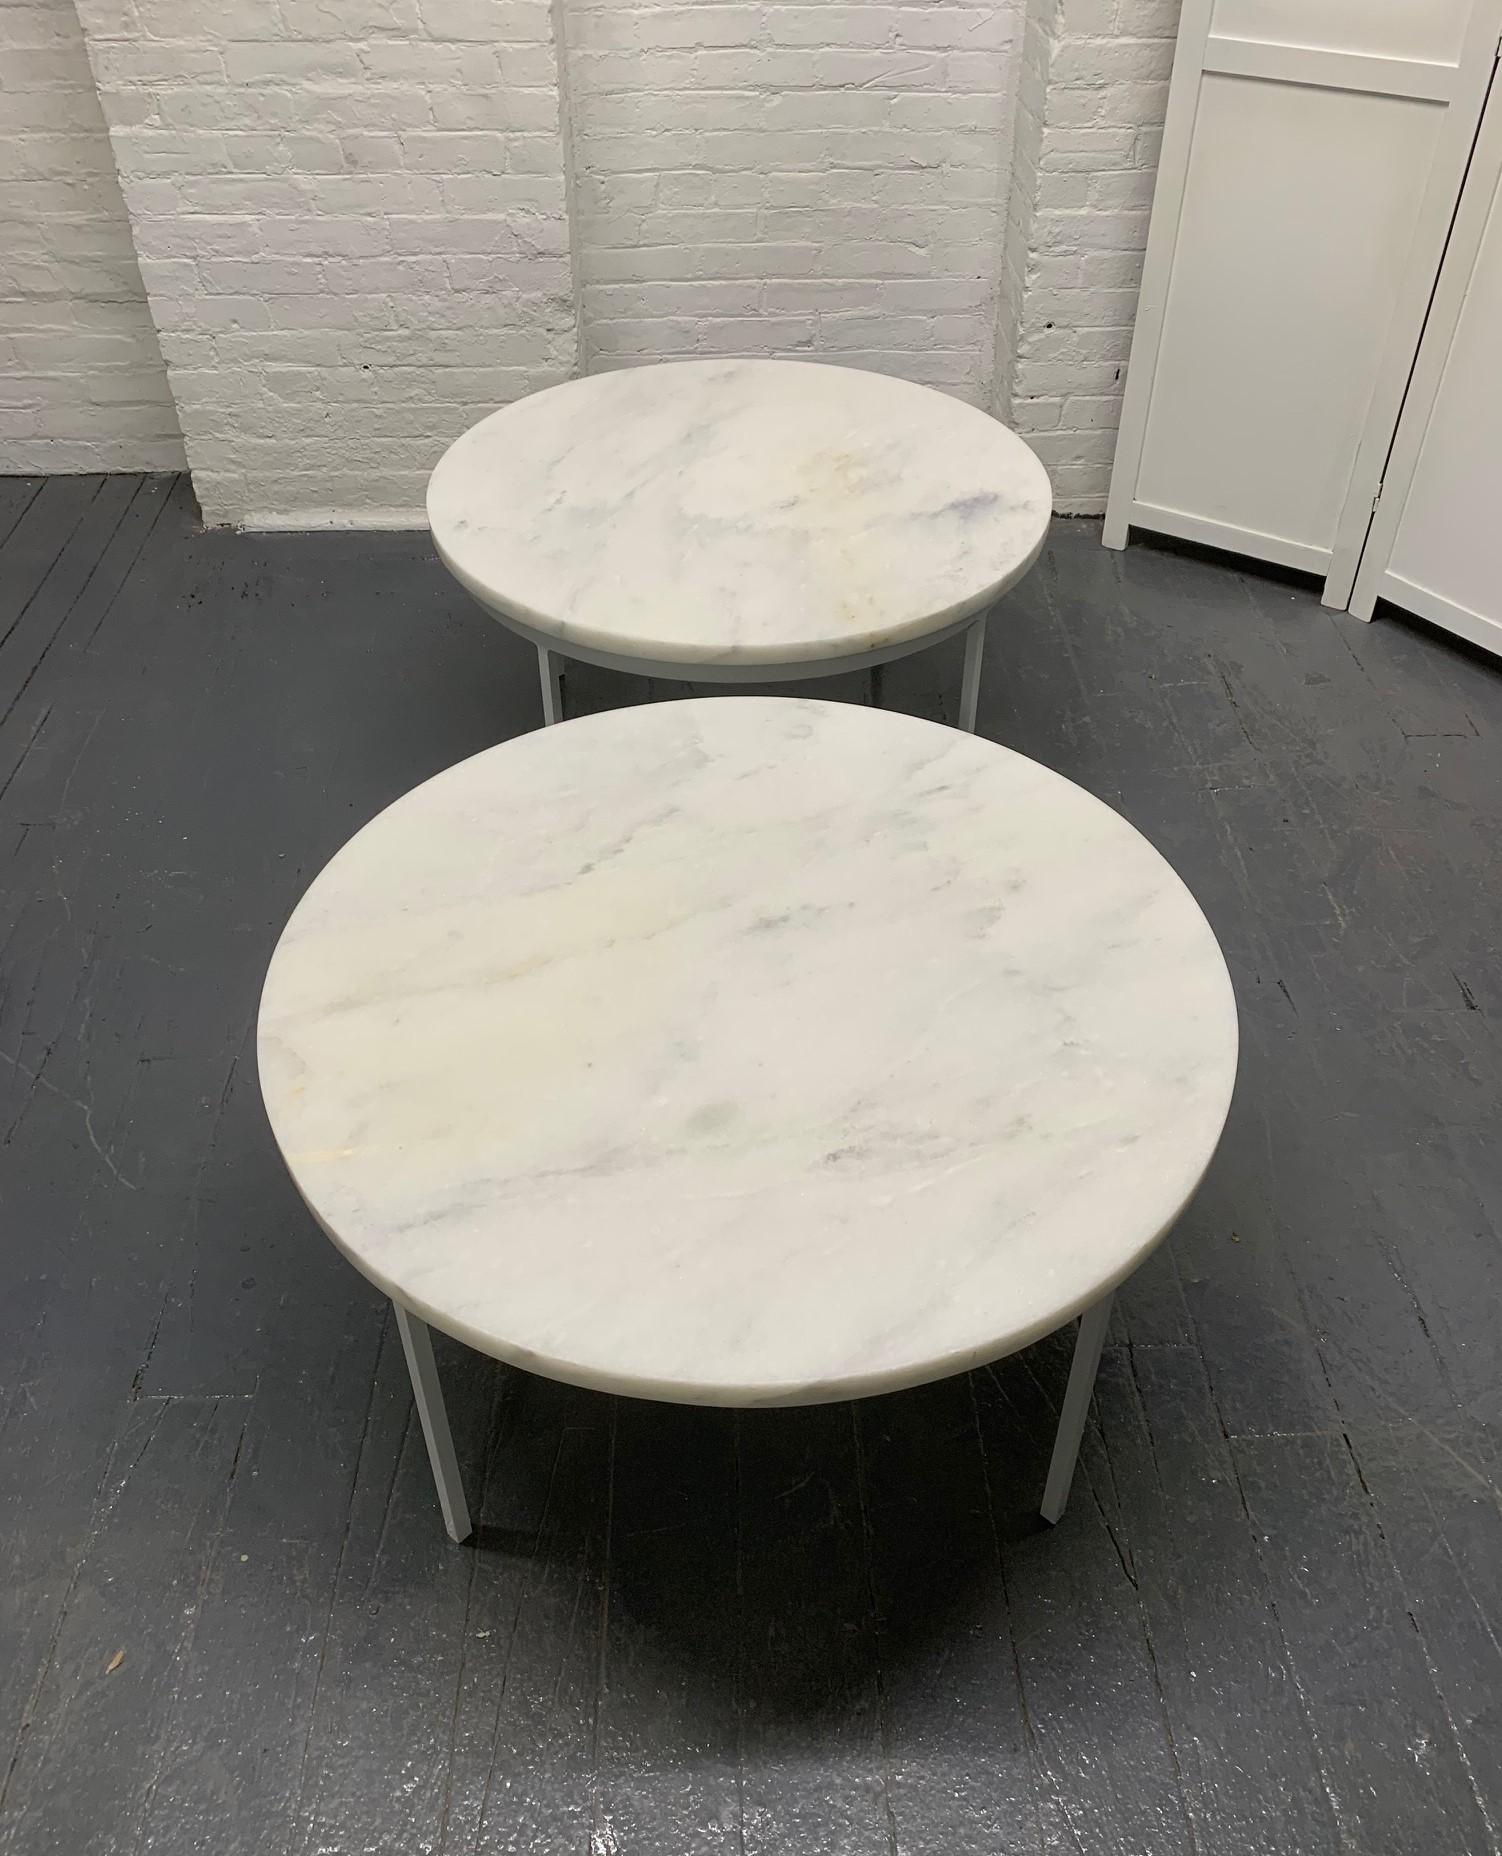 Pair of Nicos Zographos Carrara marble-top tables. The base is white painted iron with a one-inch thick Carrara marble top.